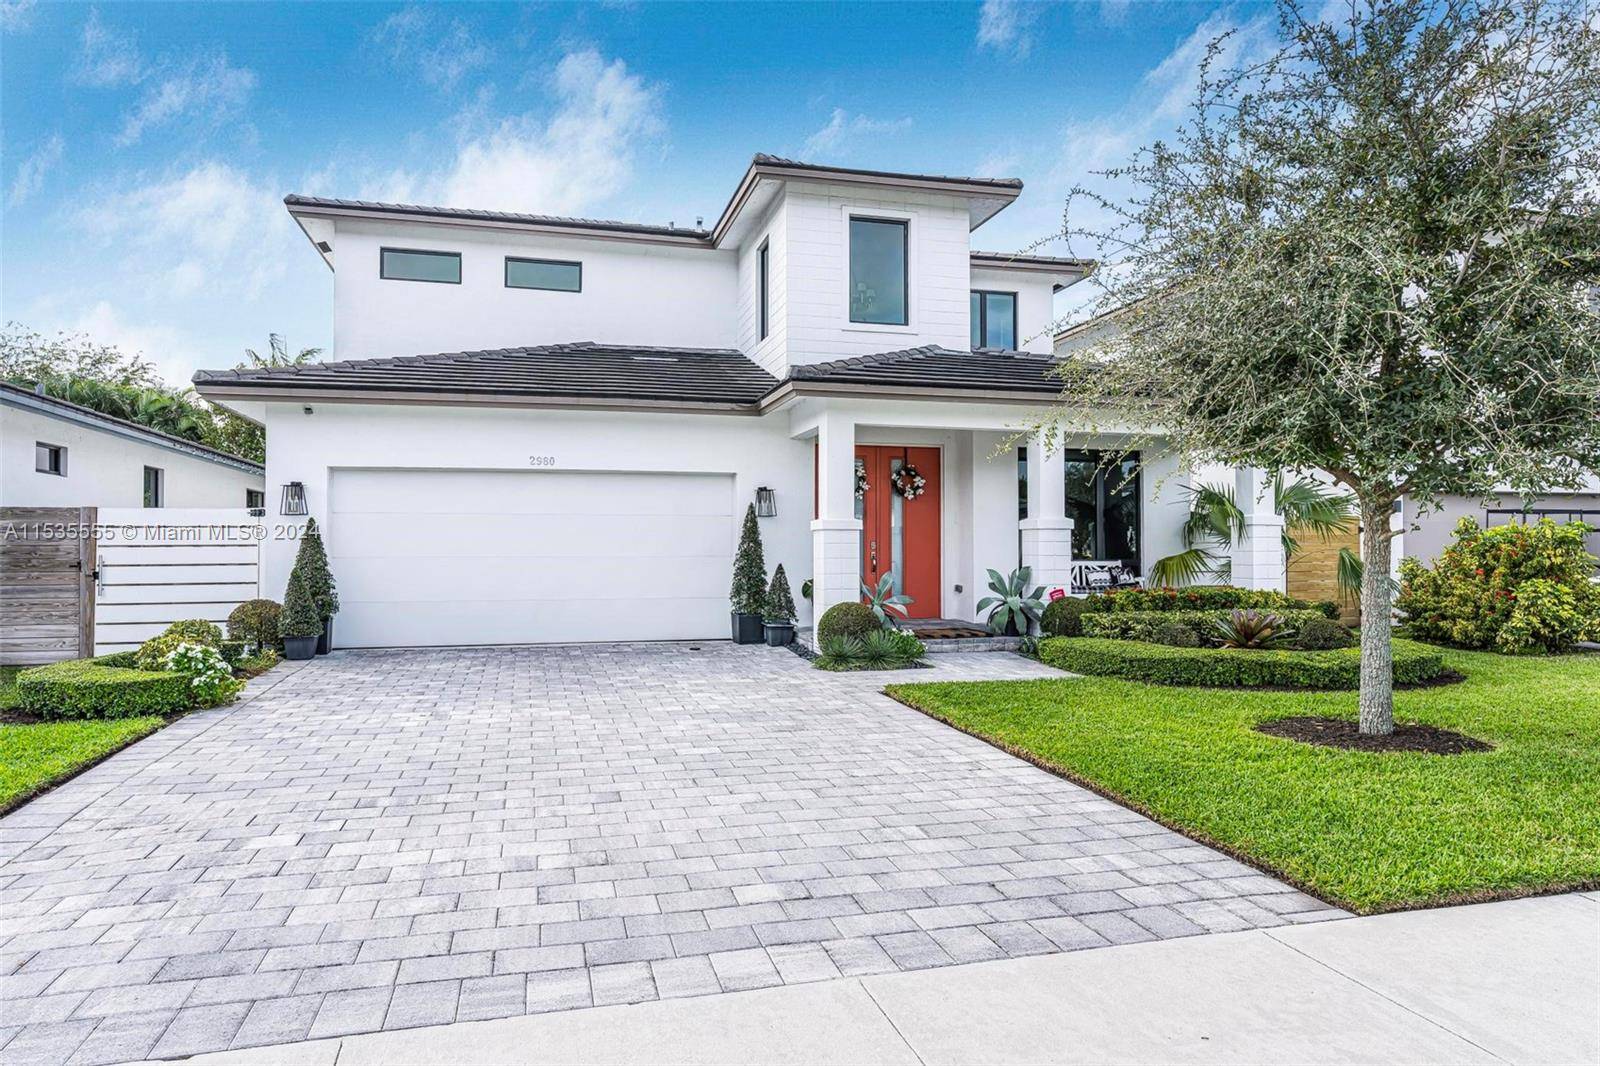 The most beautiful house in One Palm, exquisitely upgraded with porcelain floors, spacious areas for family gatherings, modern oak stairs with white risers, metal cable stair railing, 8 foot doors ...